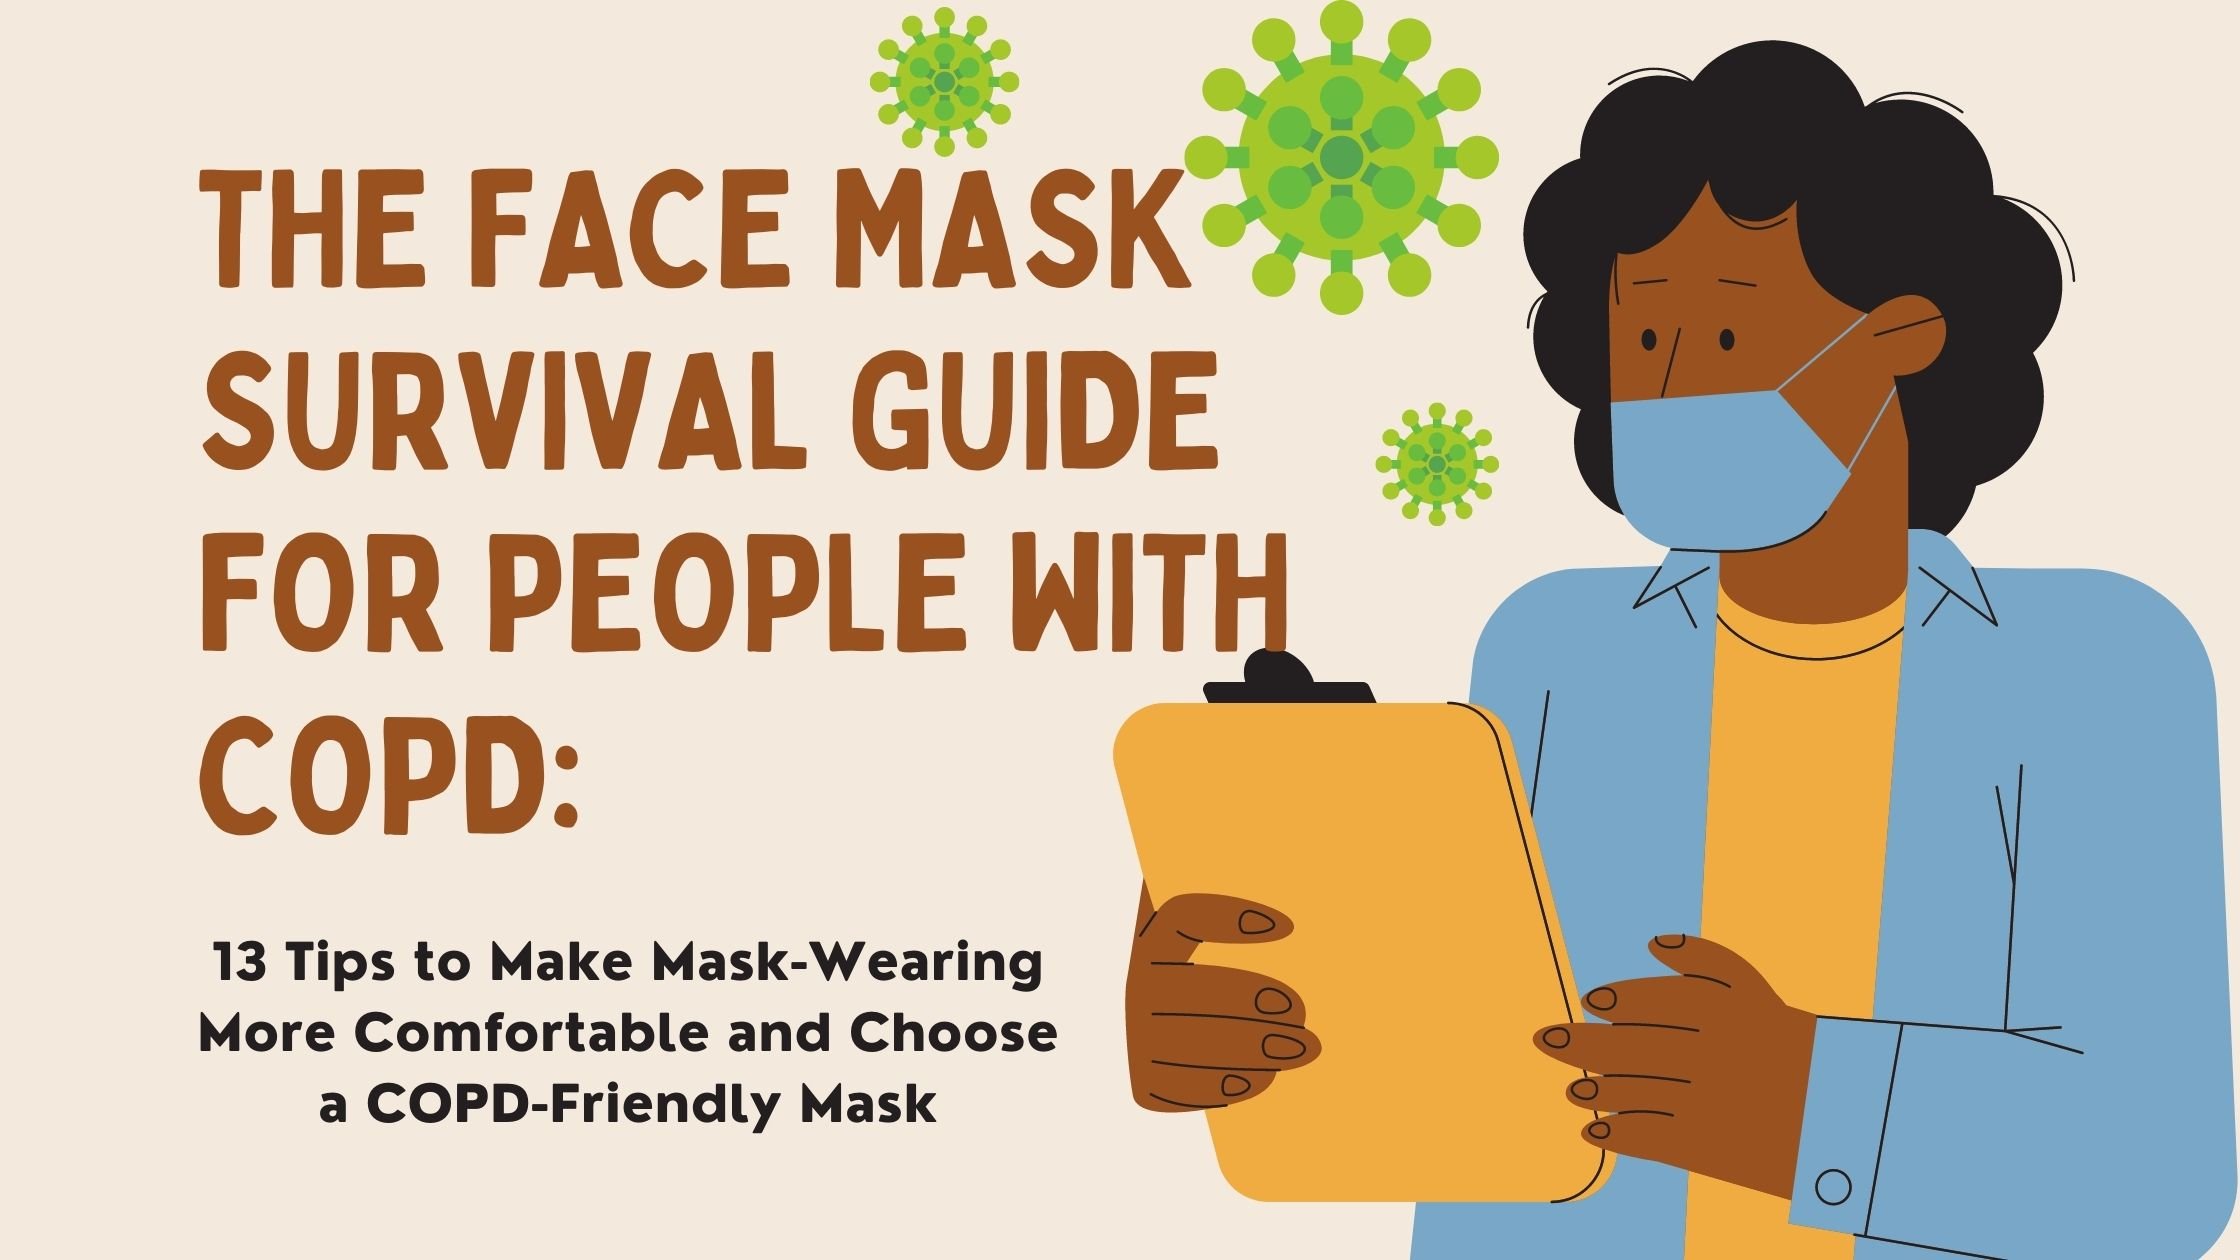 The Face Mask Survival Guide for People with COPD: 13 Tips to Make